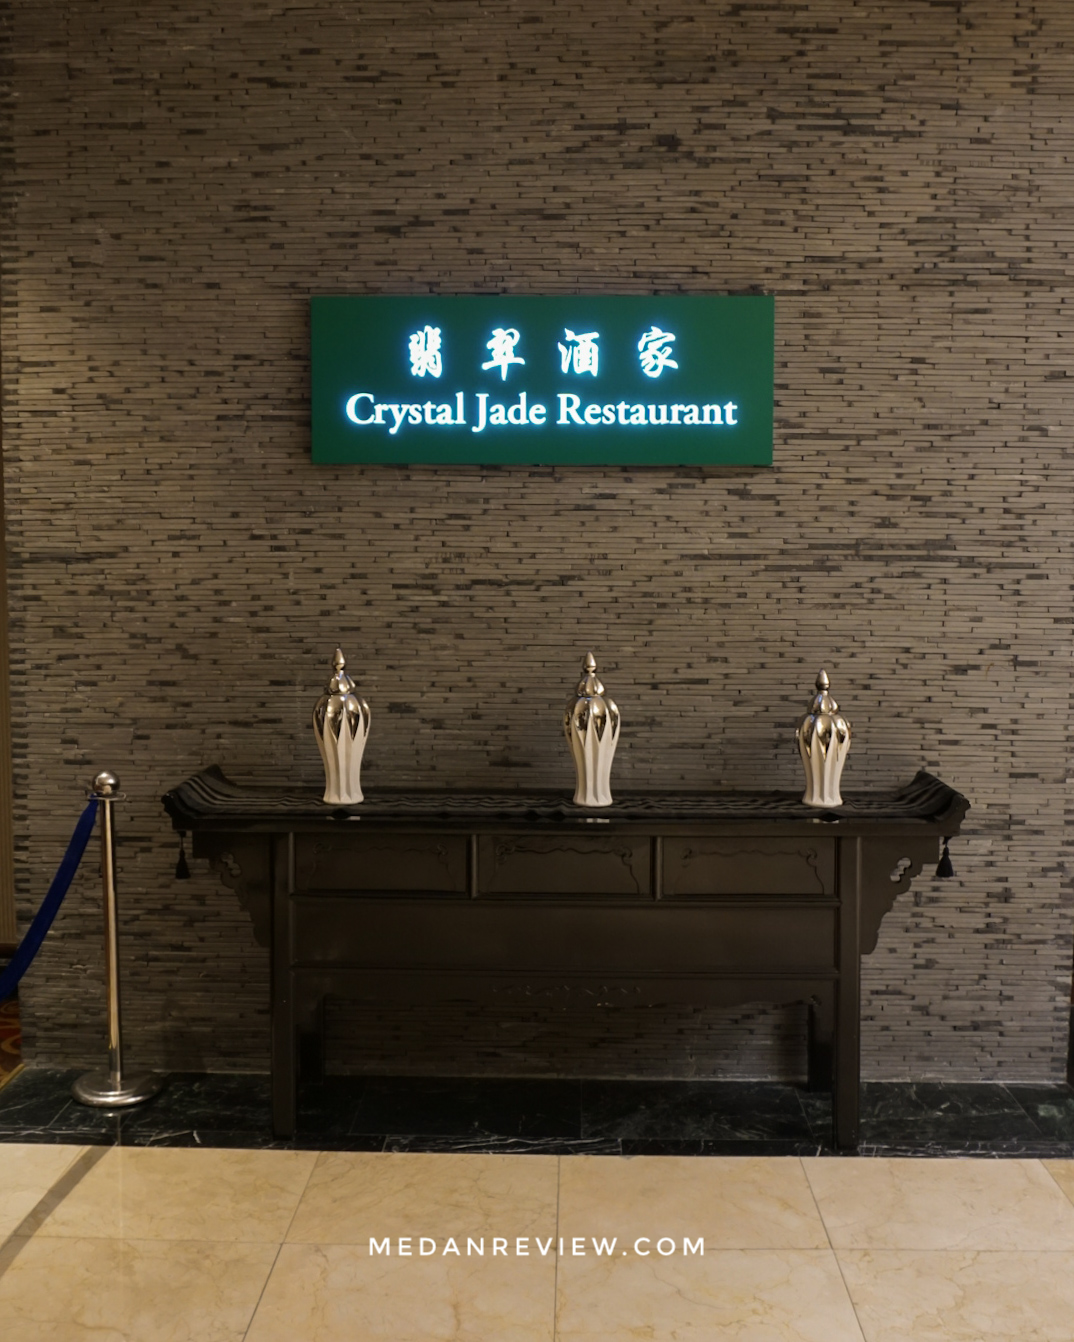 Welcome to Crystal Jade Restaurant